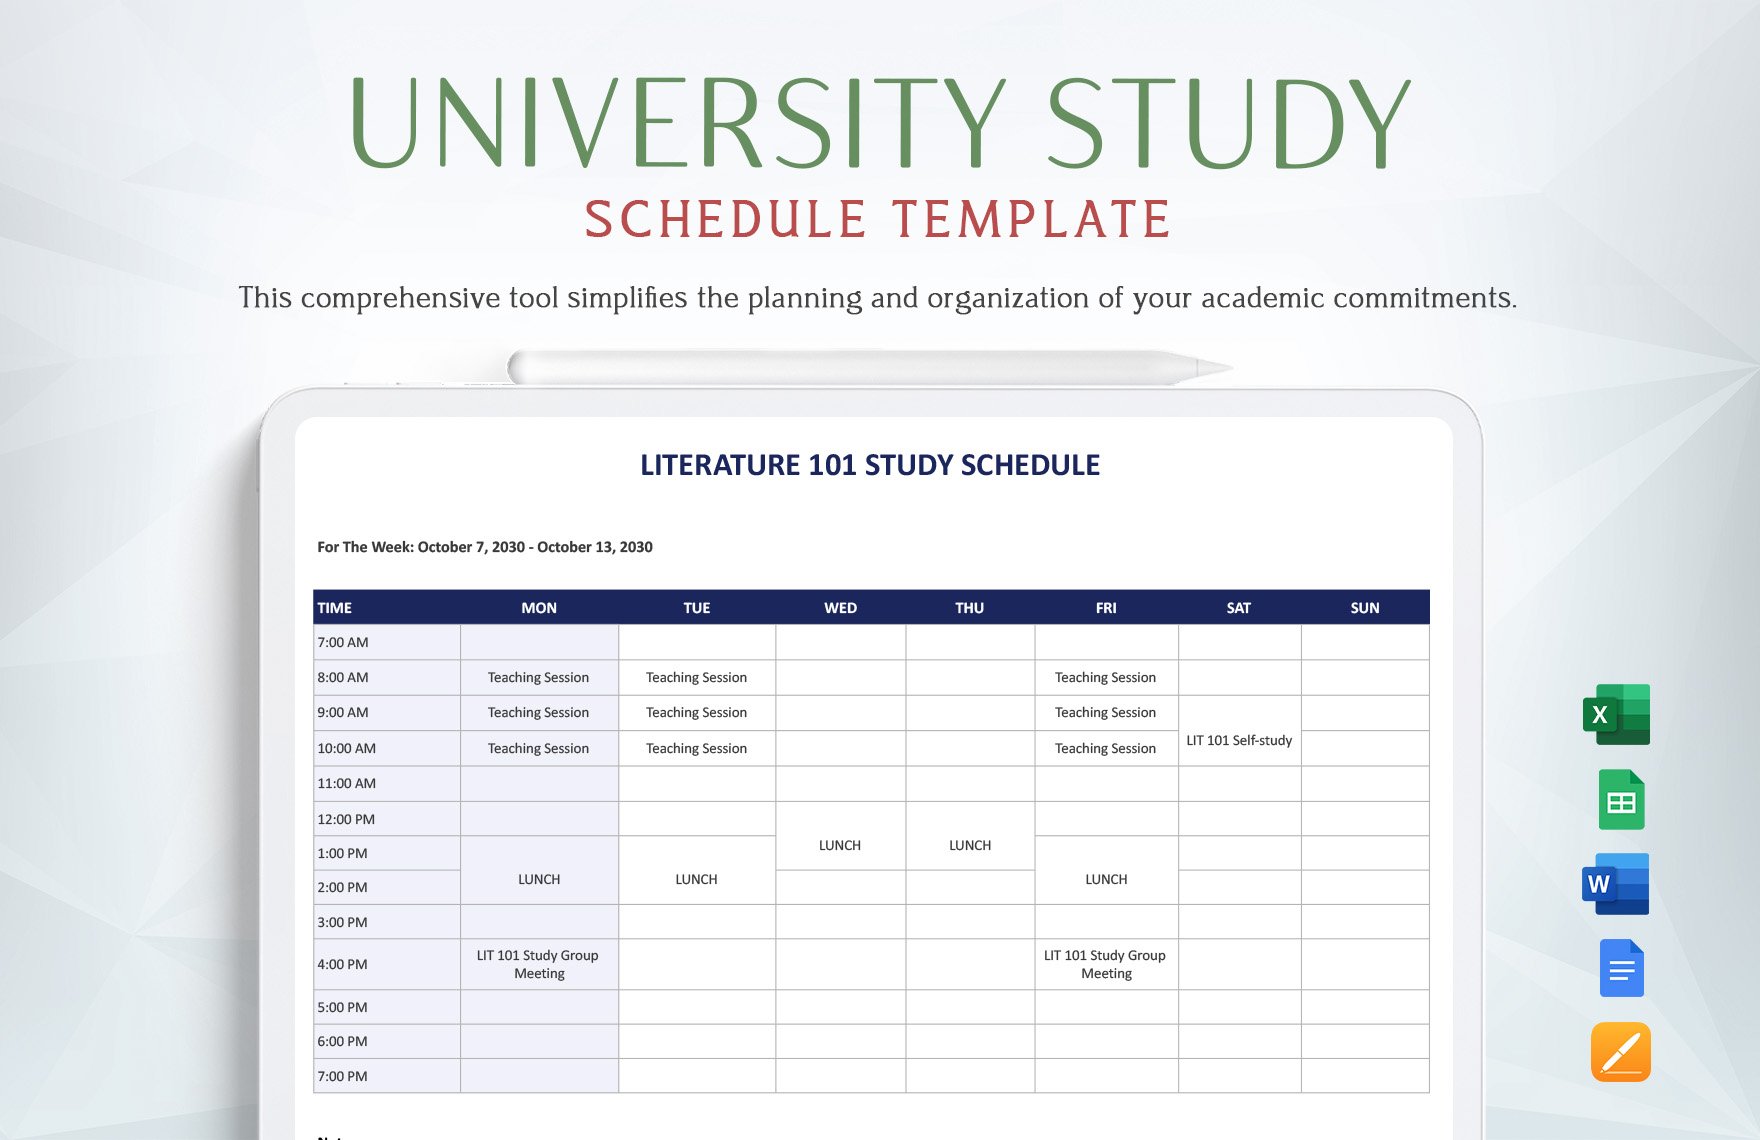 University Study Schedule Template in Word, Google Docs, Excel, Google Sheets, Apple Pages